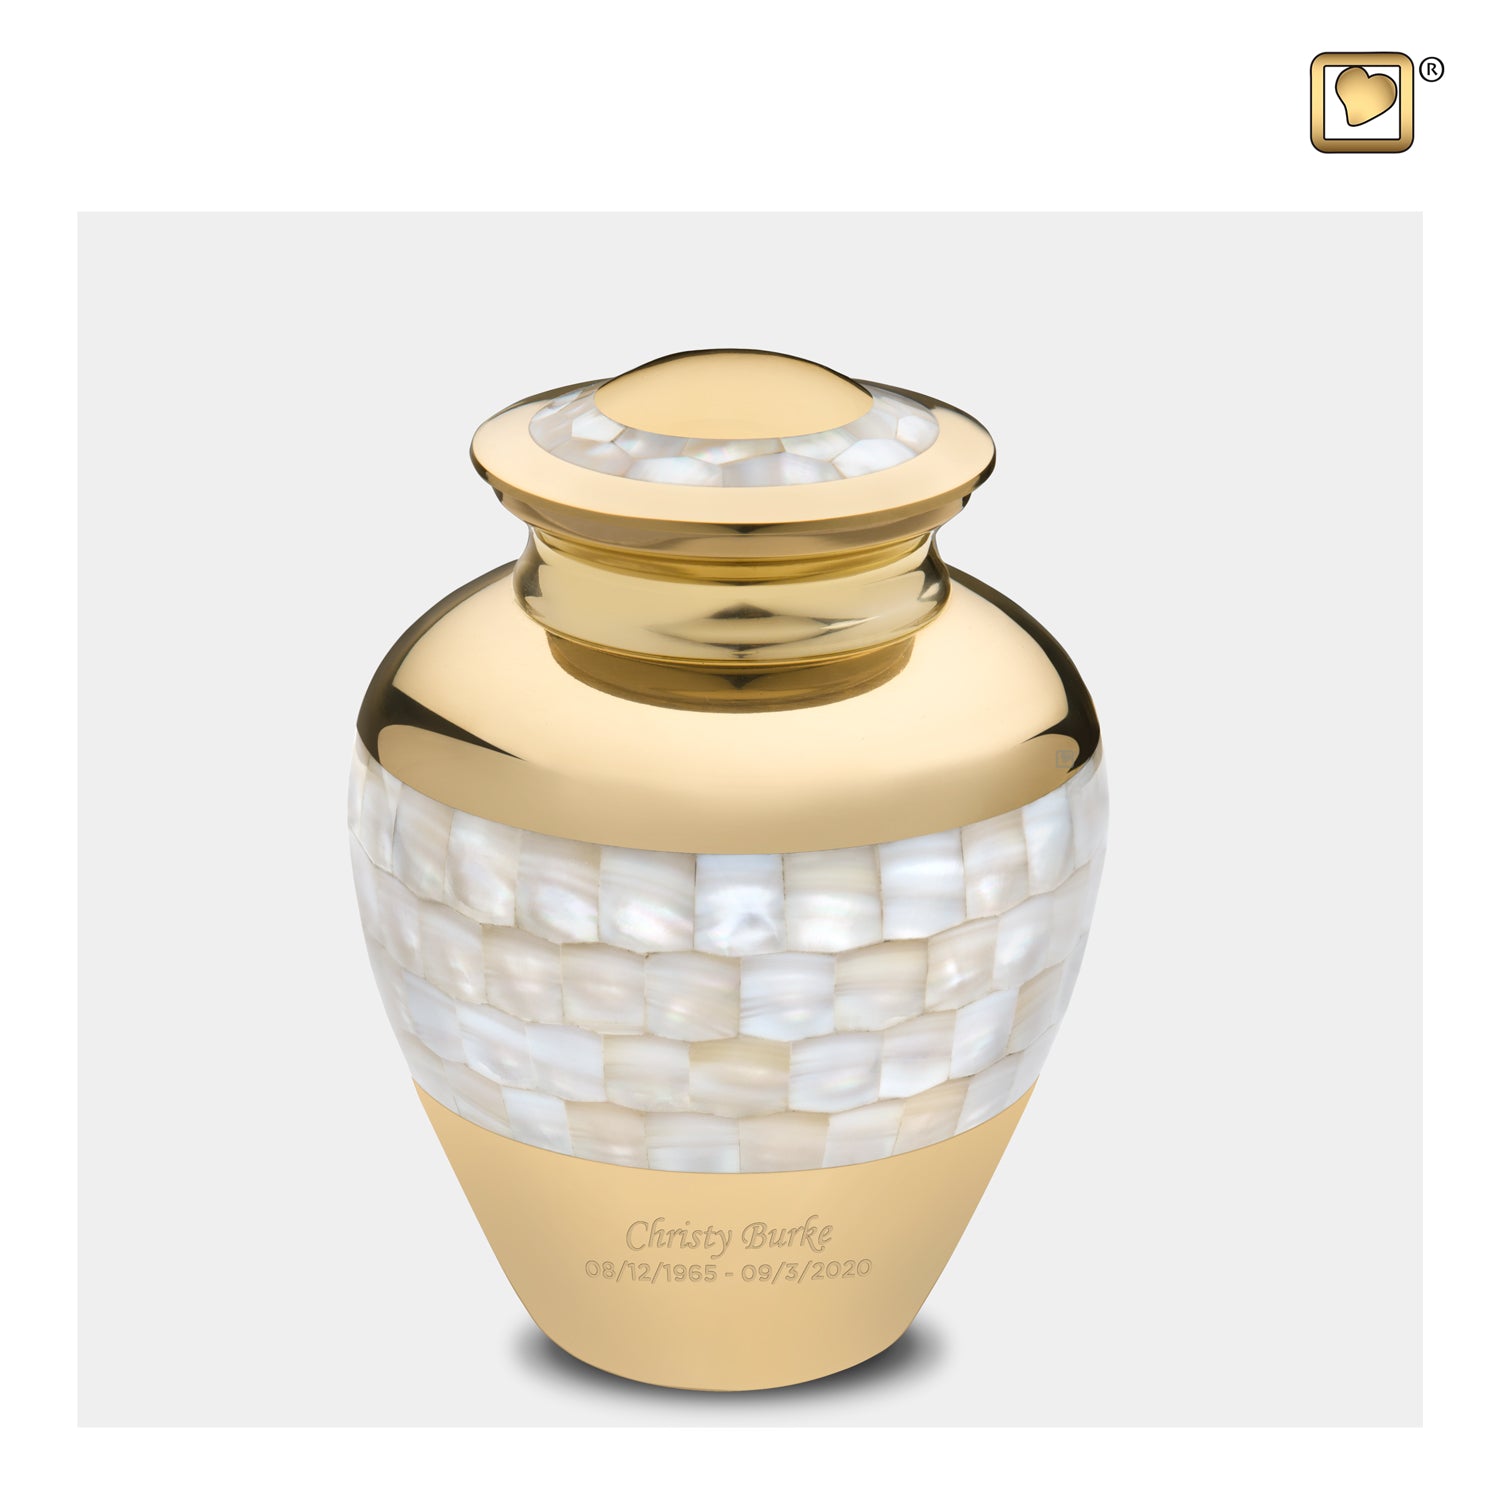 Medium Mother of Pearl Cremation Urn